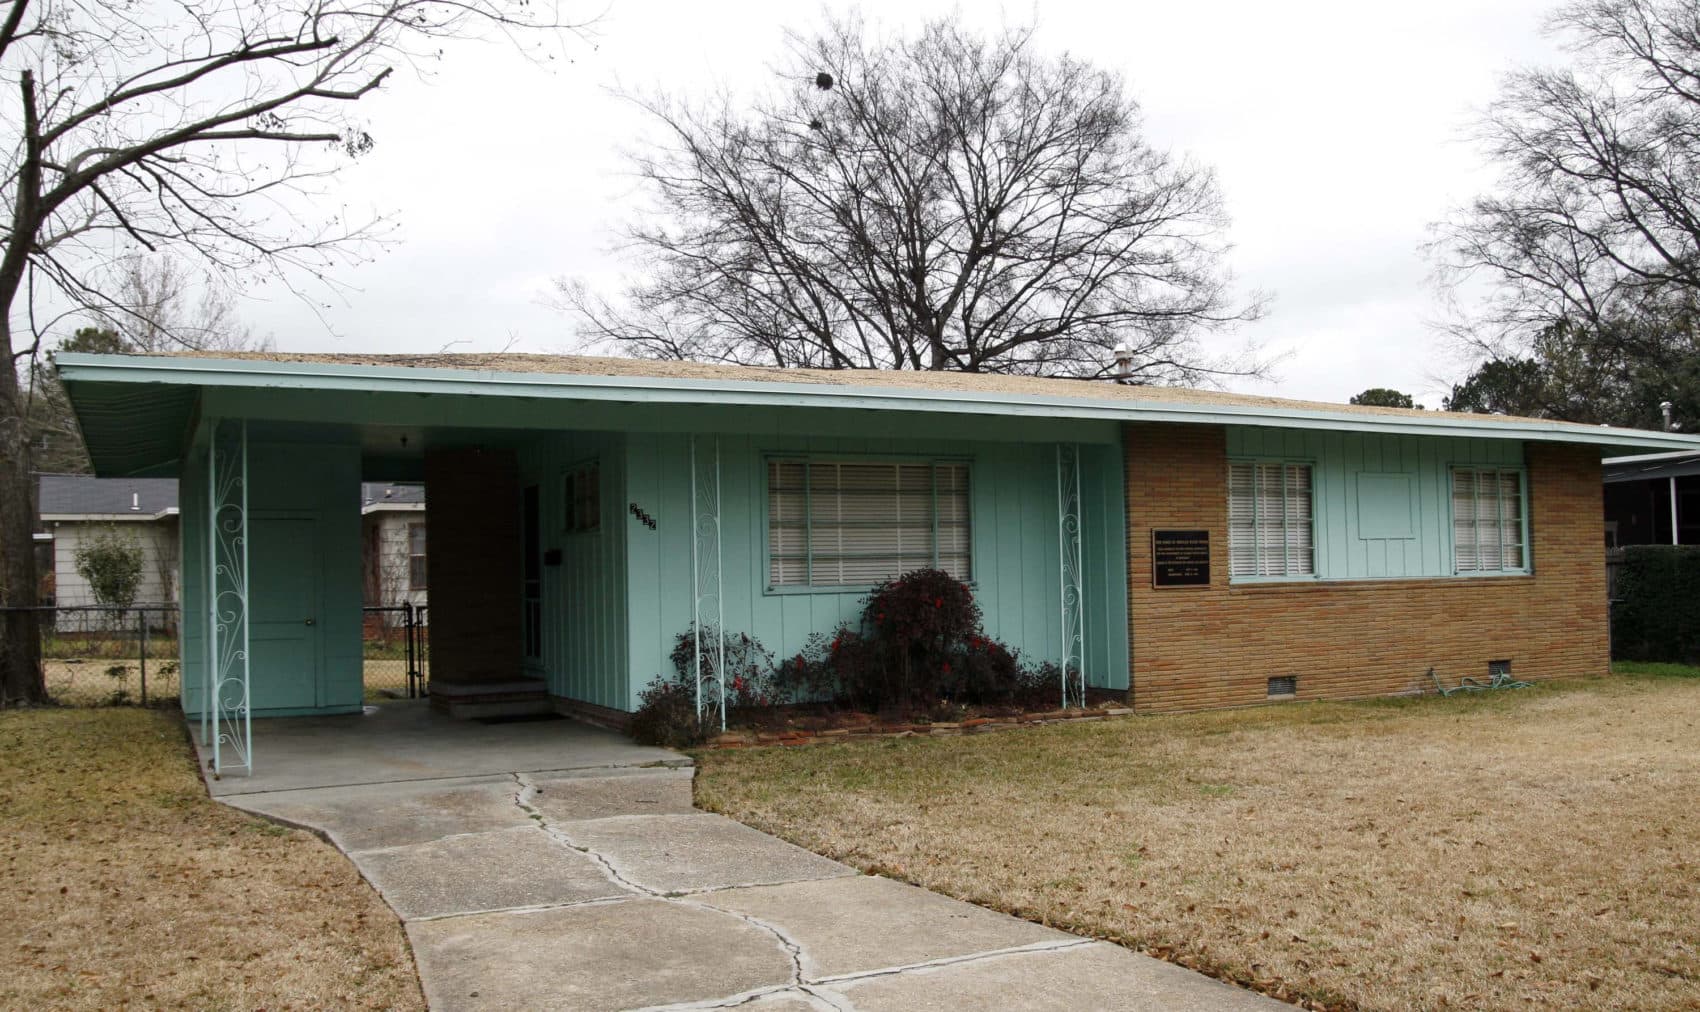 The house of slain civil rights leader Medgar Evers is seen in Jackson, Miss. (Rogelio V. Solis/AP)